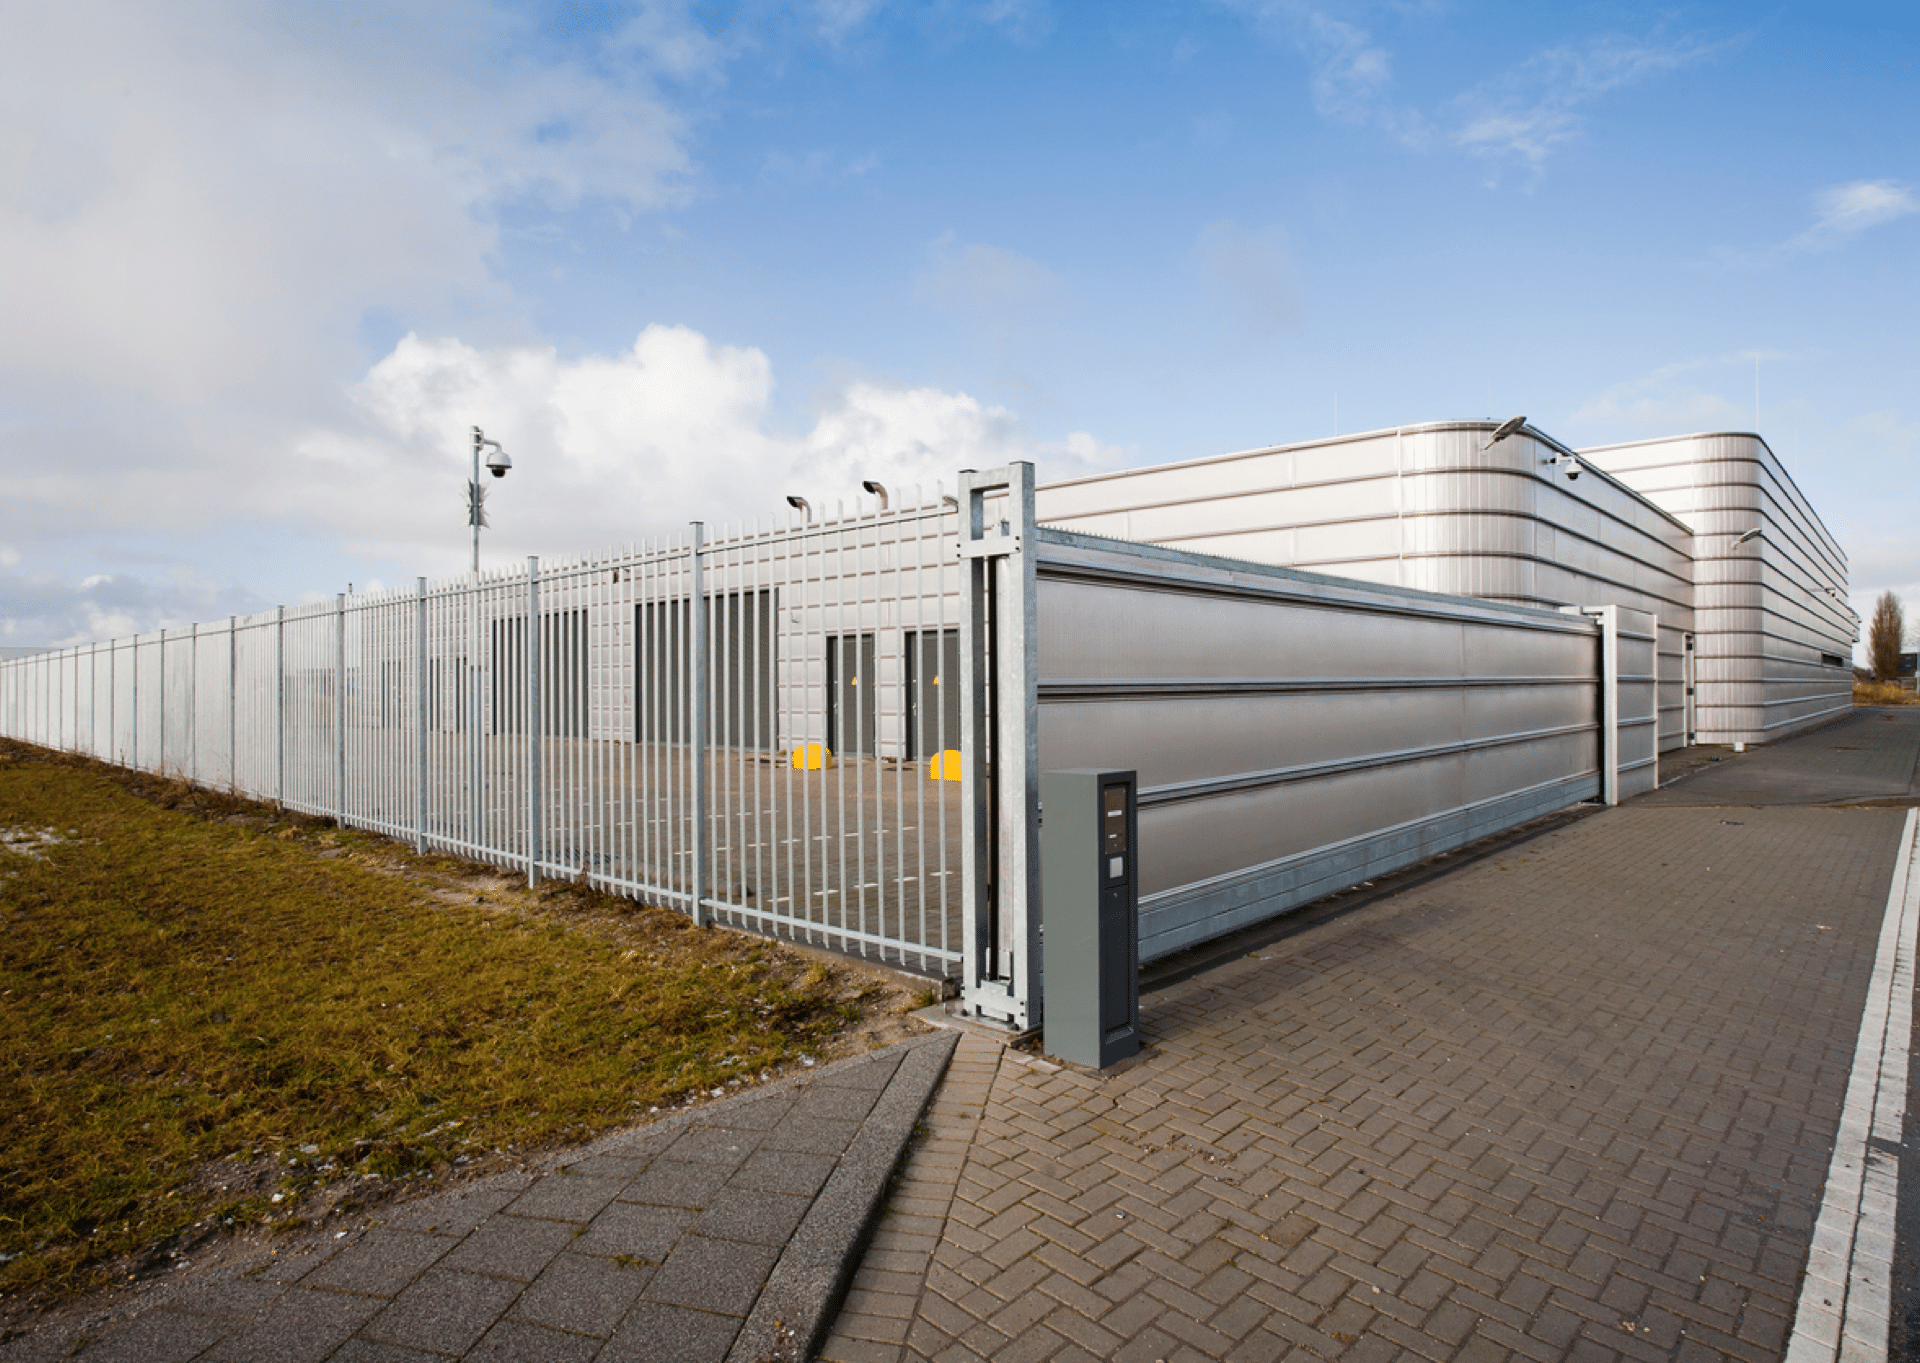 Perimeter gate with CCTV cameras installed by Guardian Access Solutions for business safety.